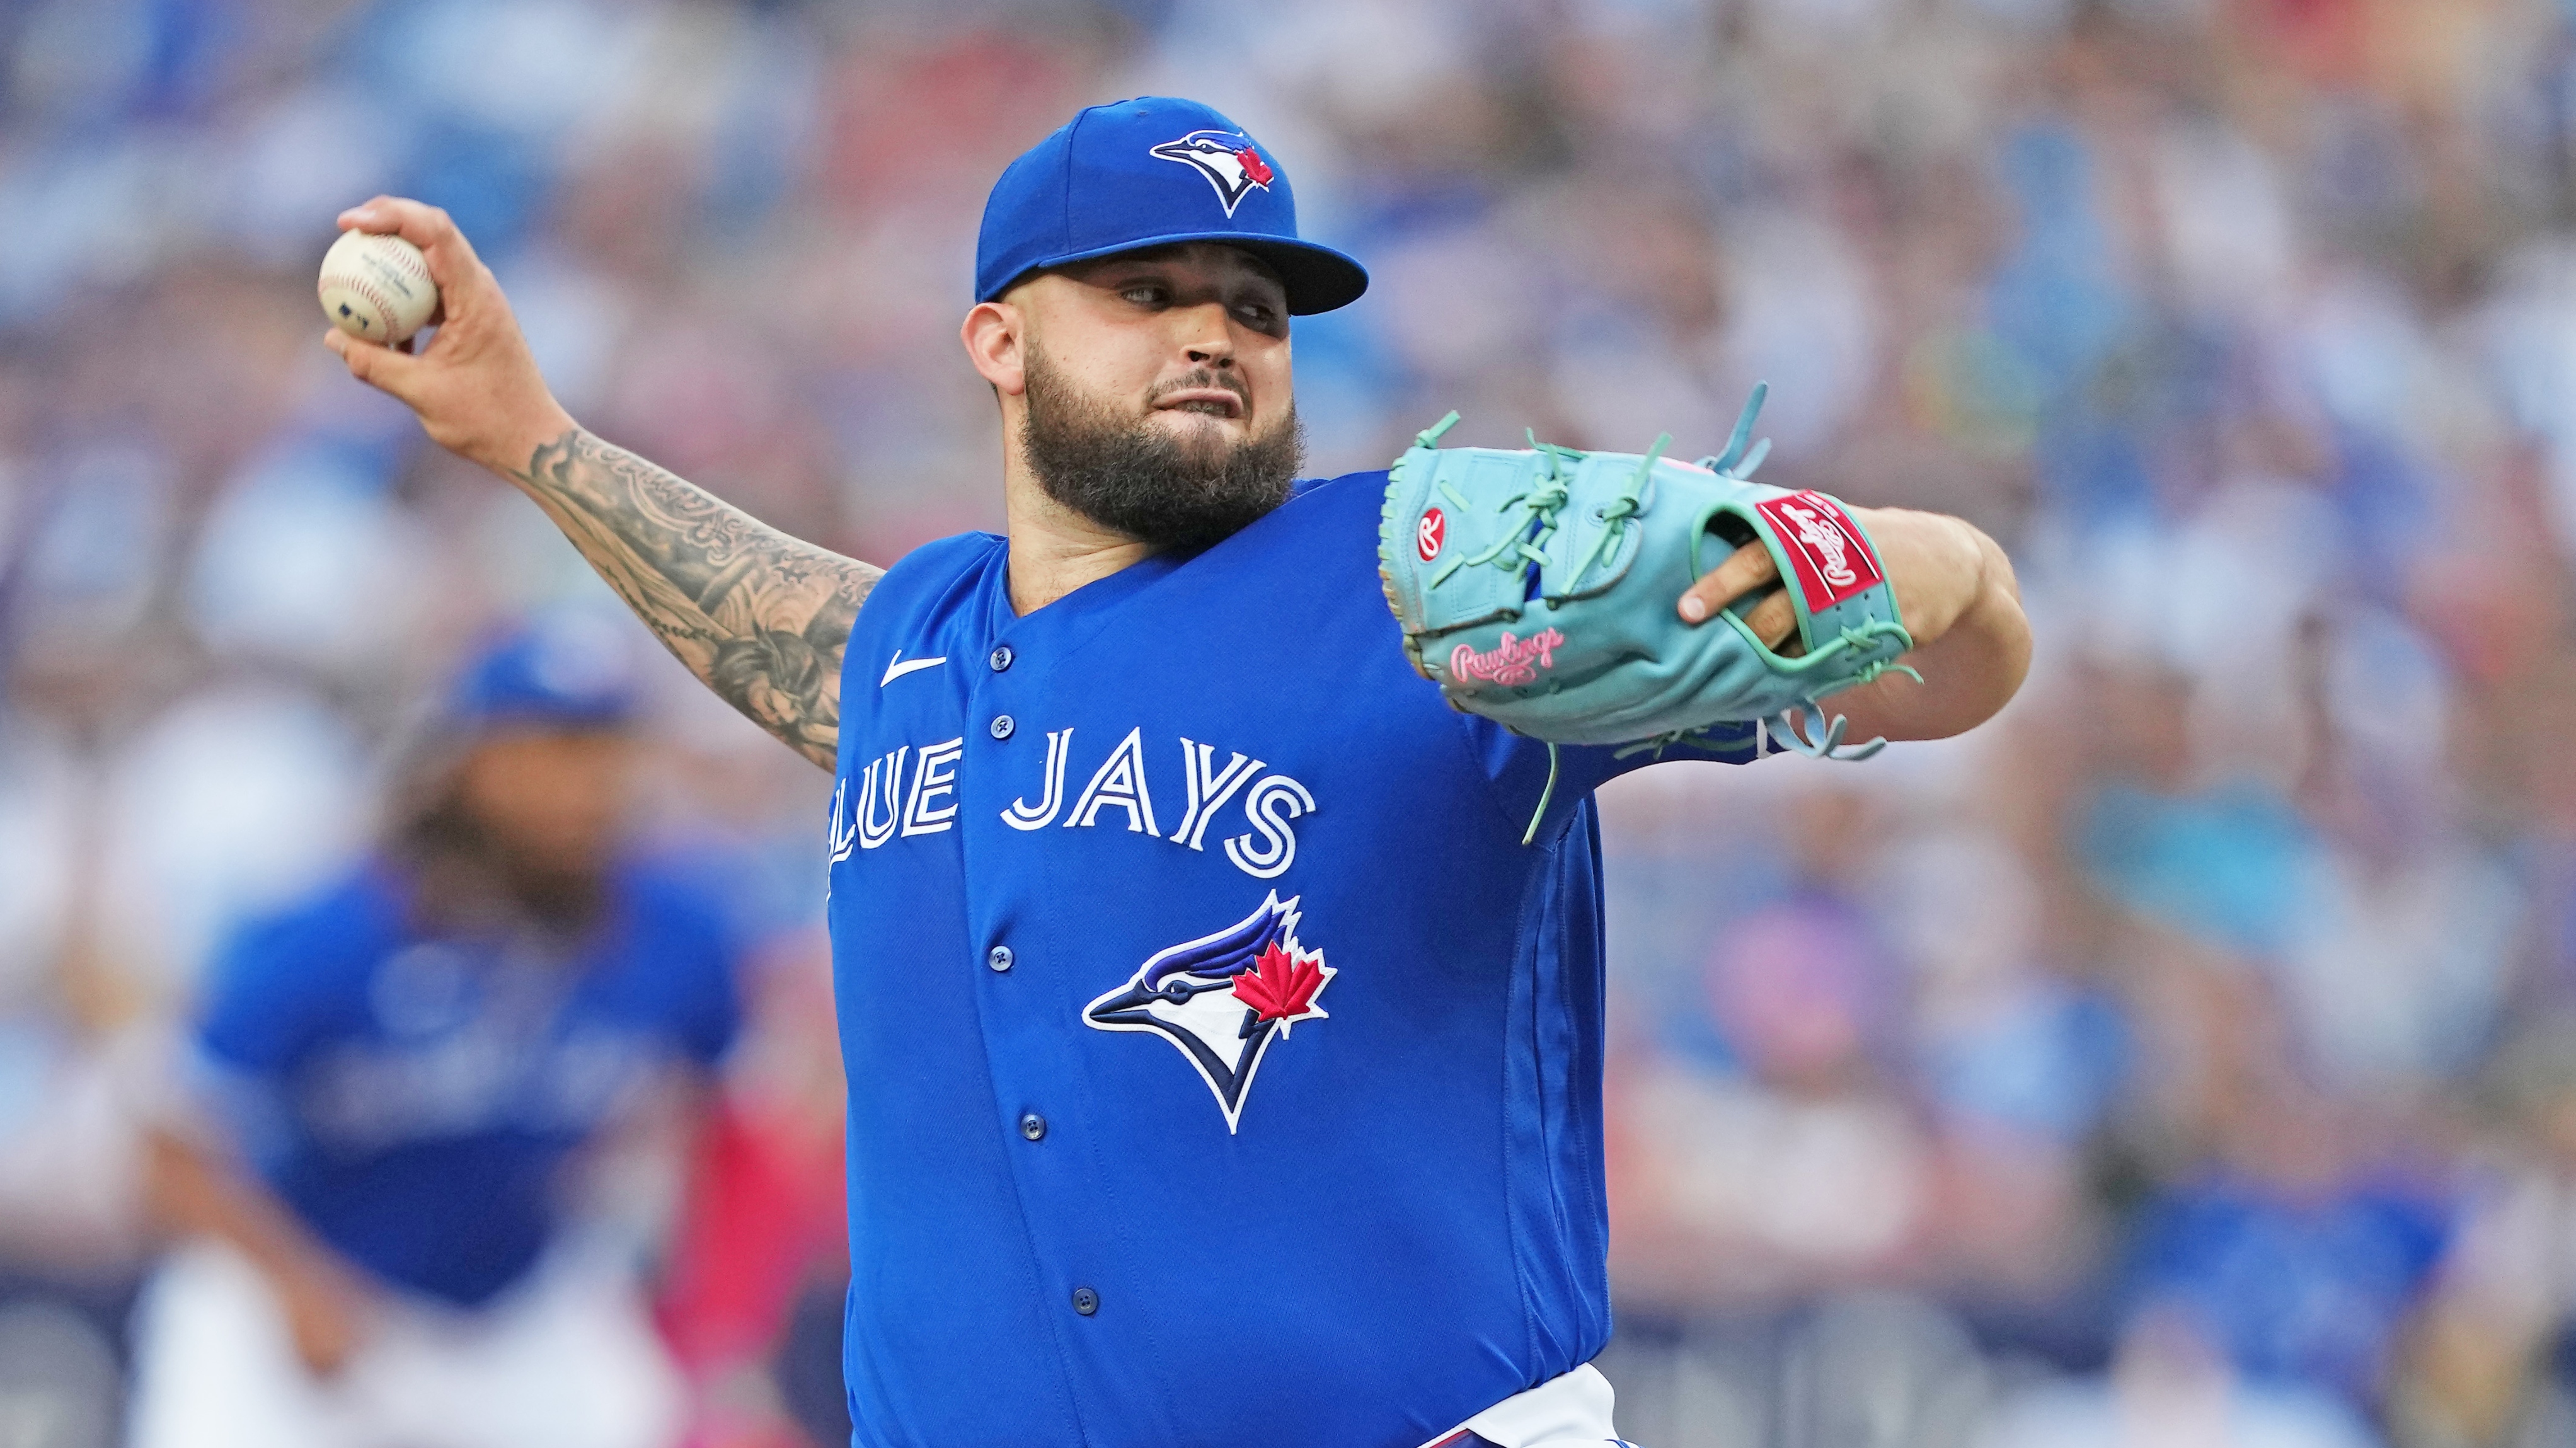 Demoted Blue Jays star Alek Manoah strikes out 10 in strong Double